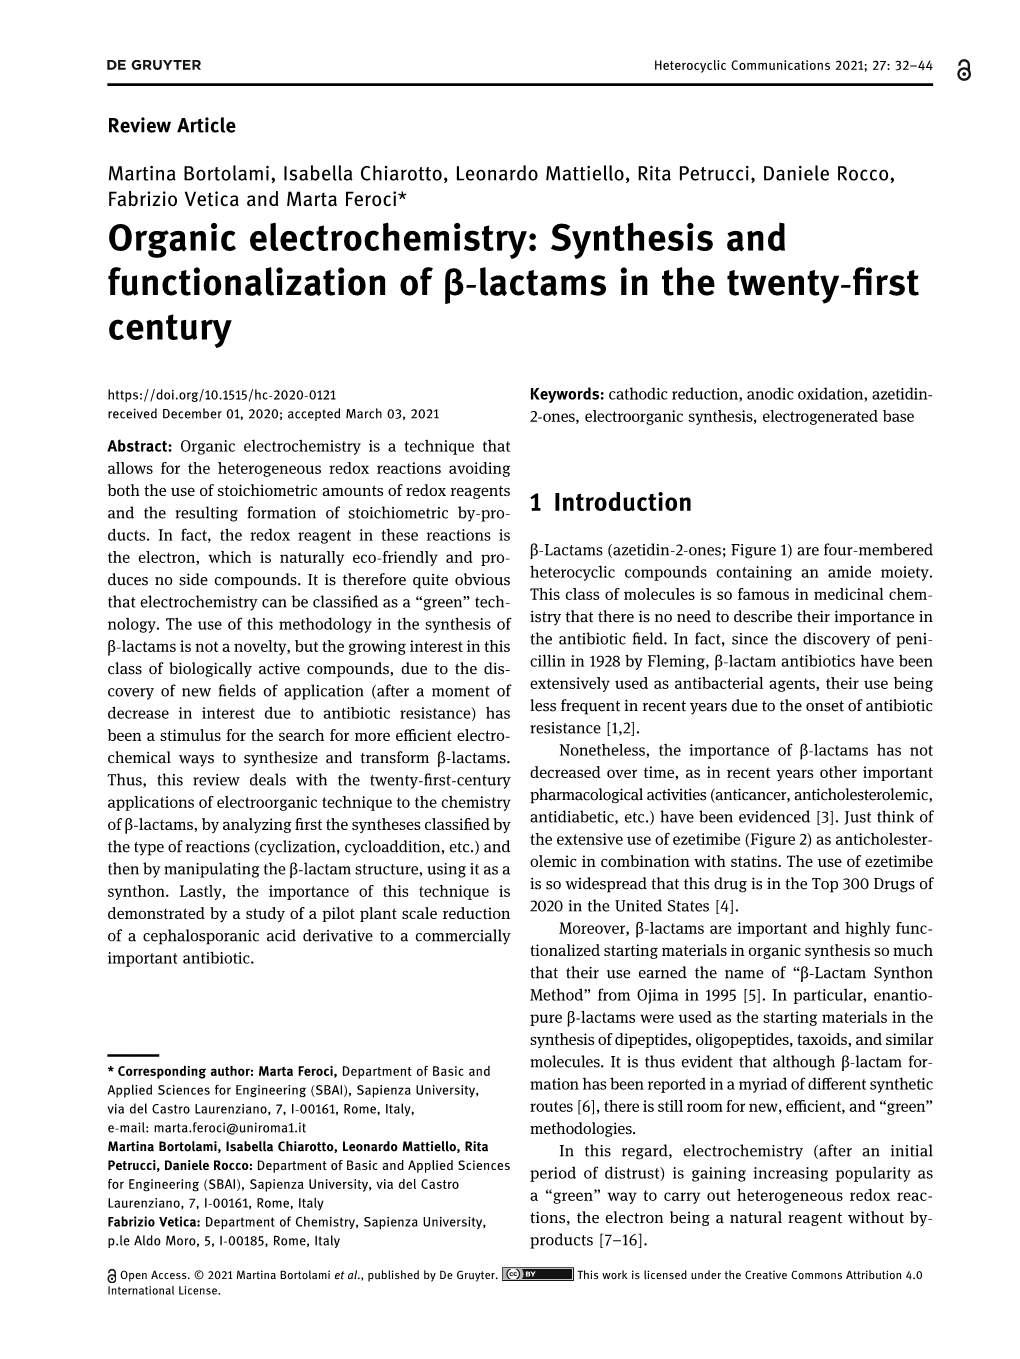 Organic Electrochemistry: Synthesis and Functionalization of Β-Lactams In